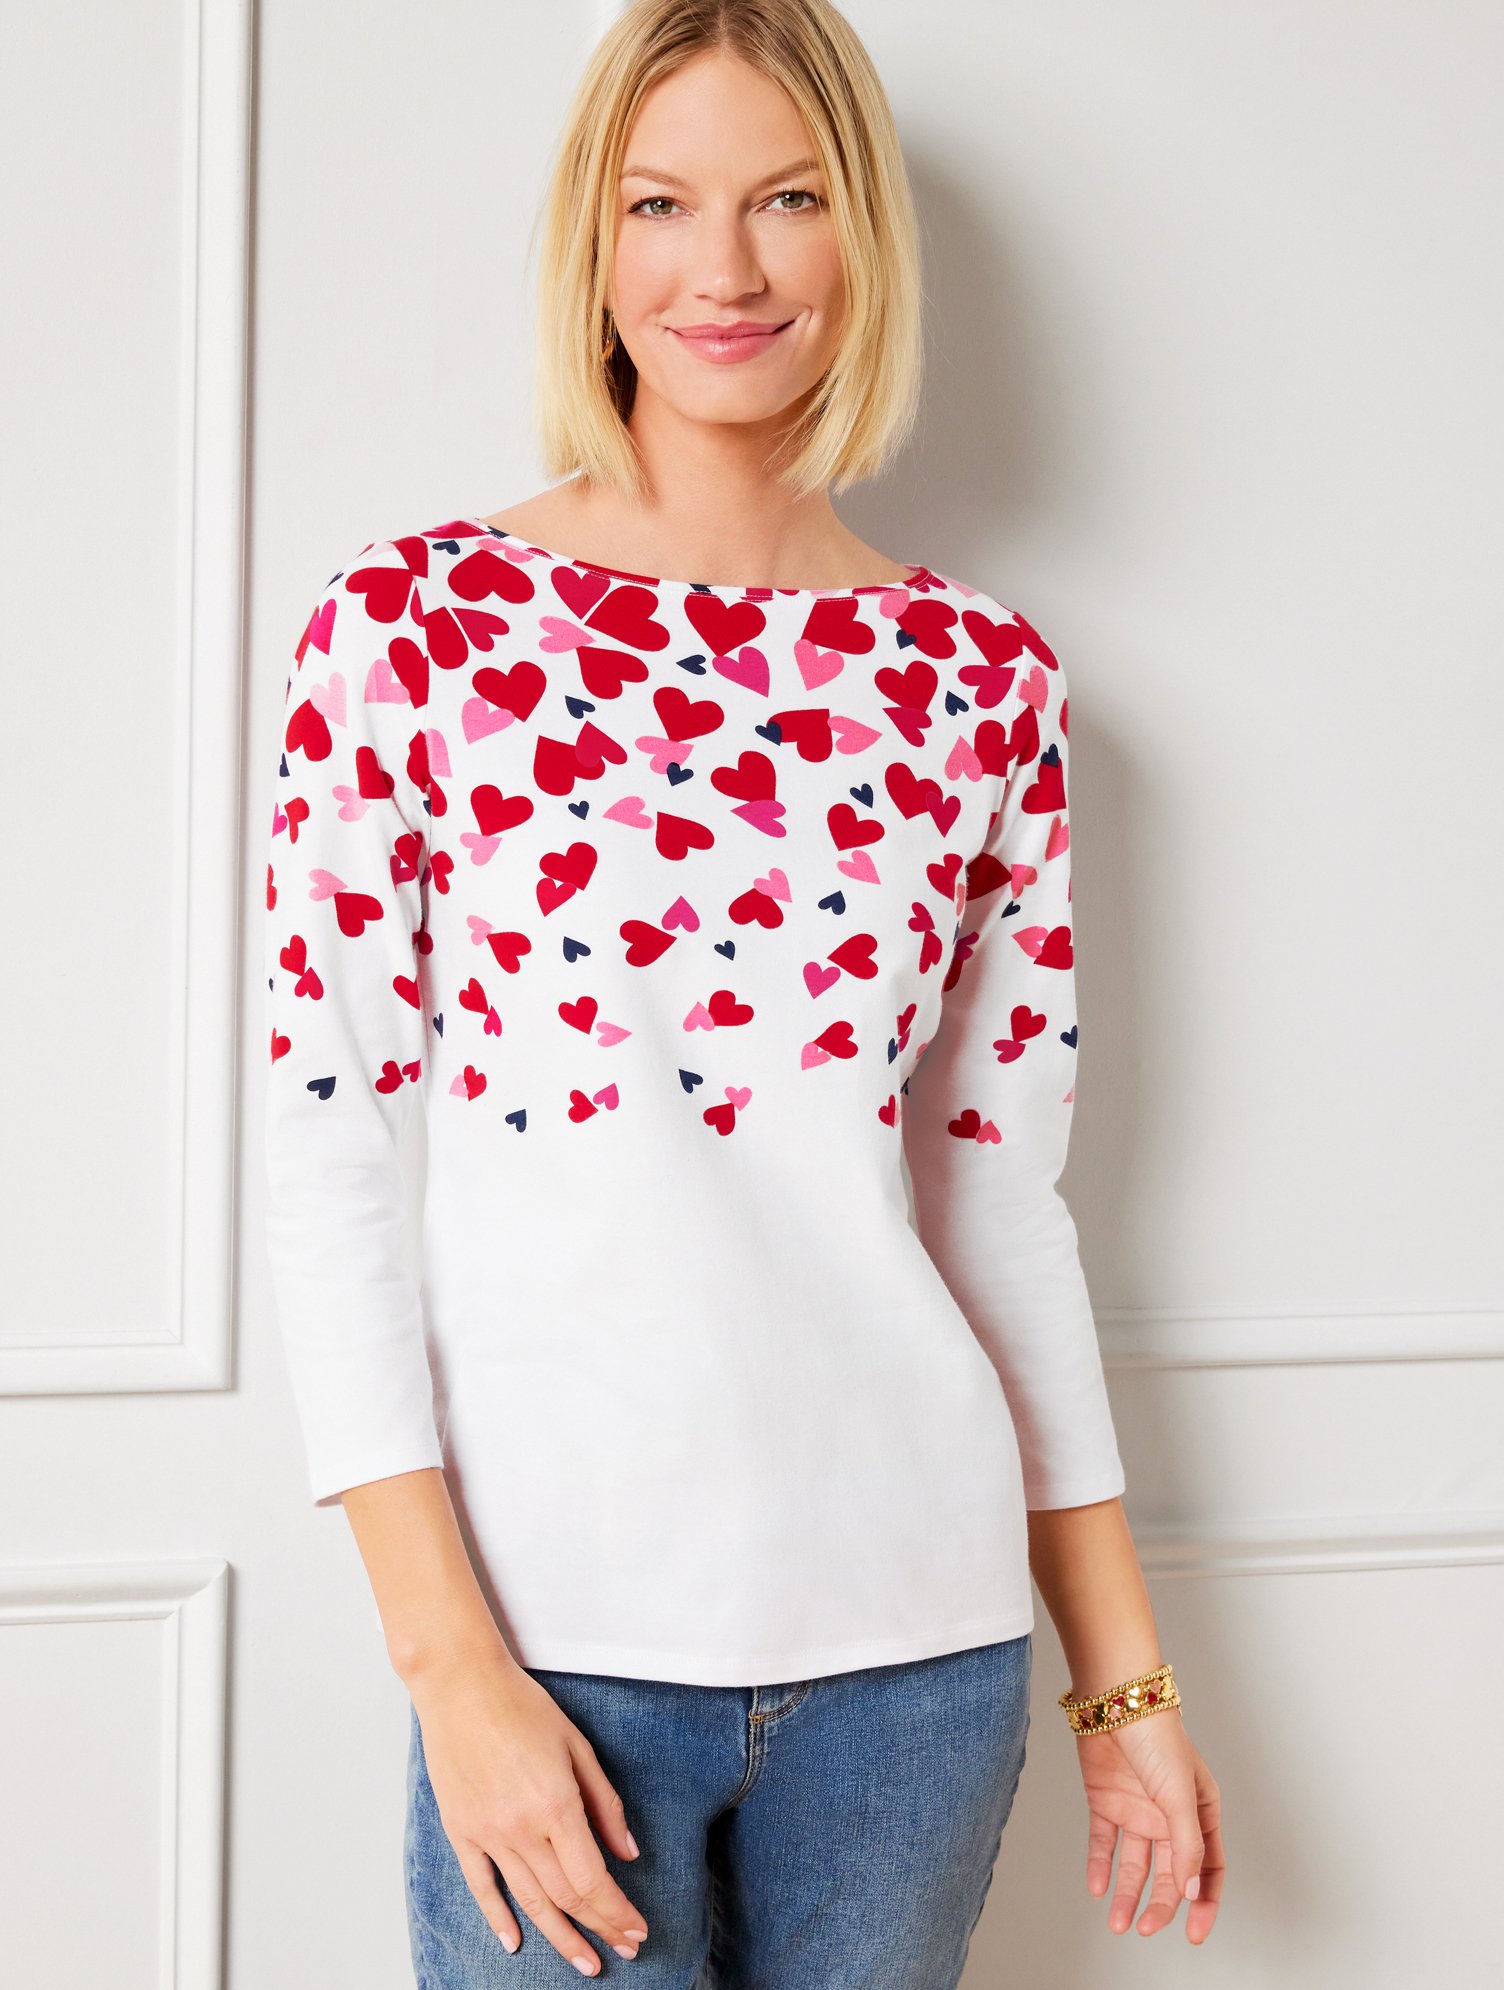 Talbots Bateau Neck T-shirt - Scattered Hearts - White - 3x